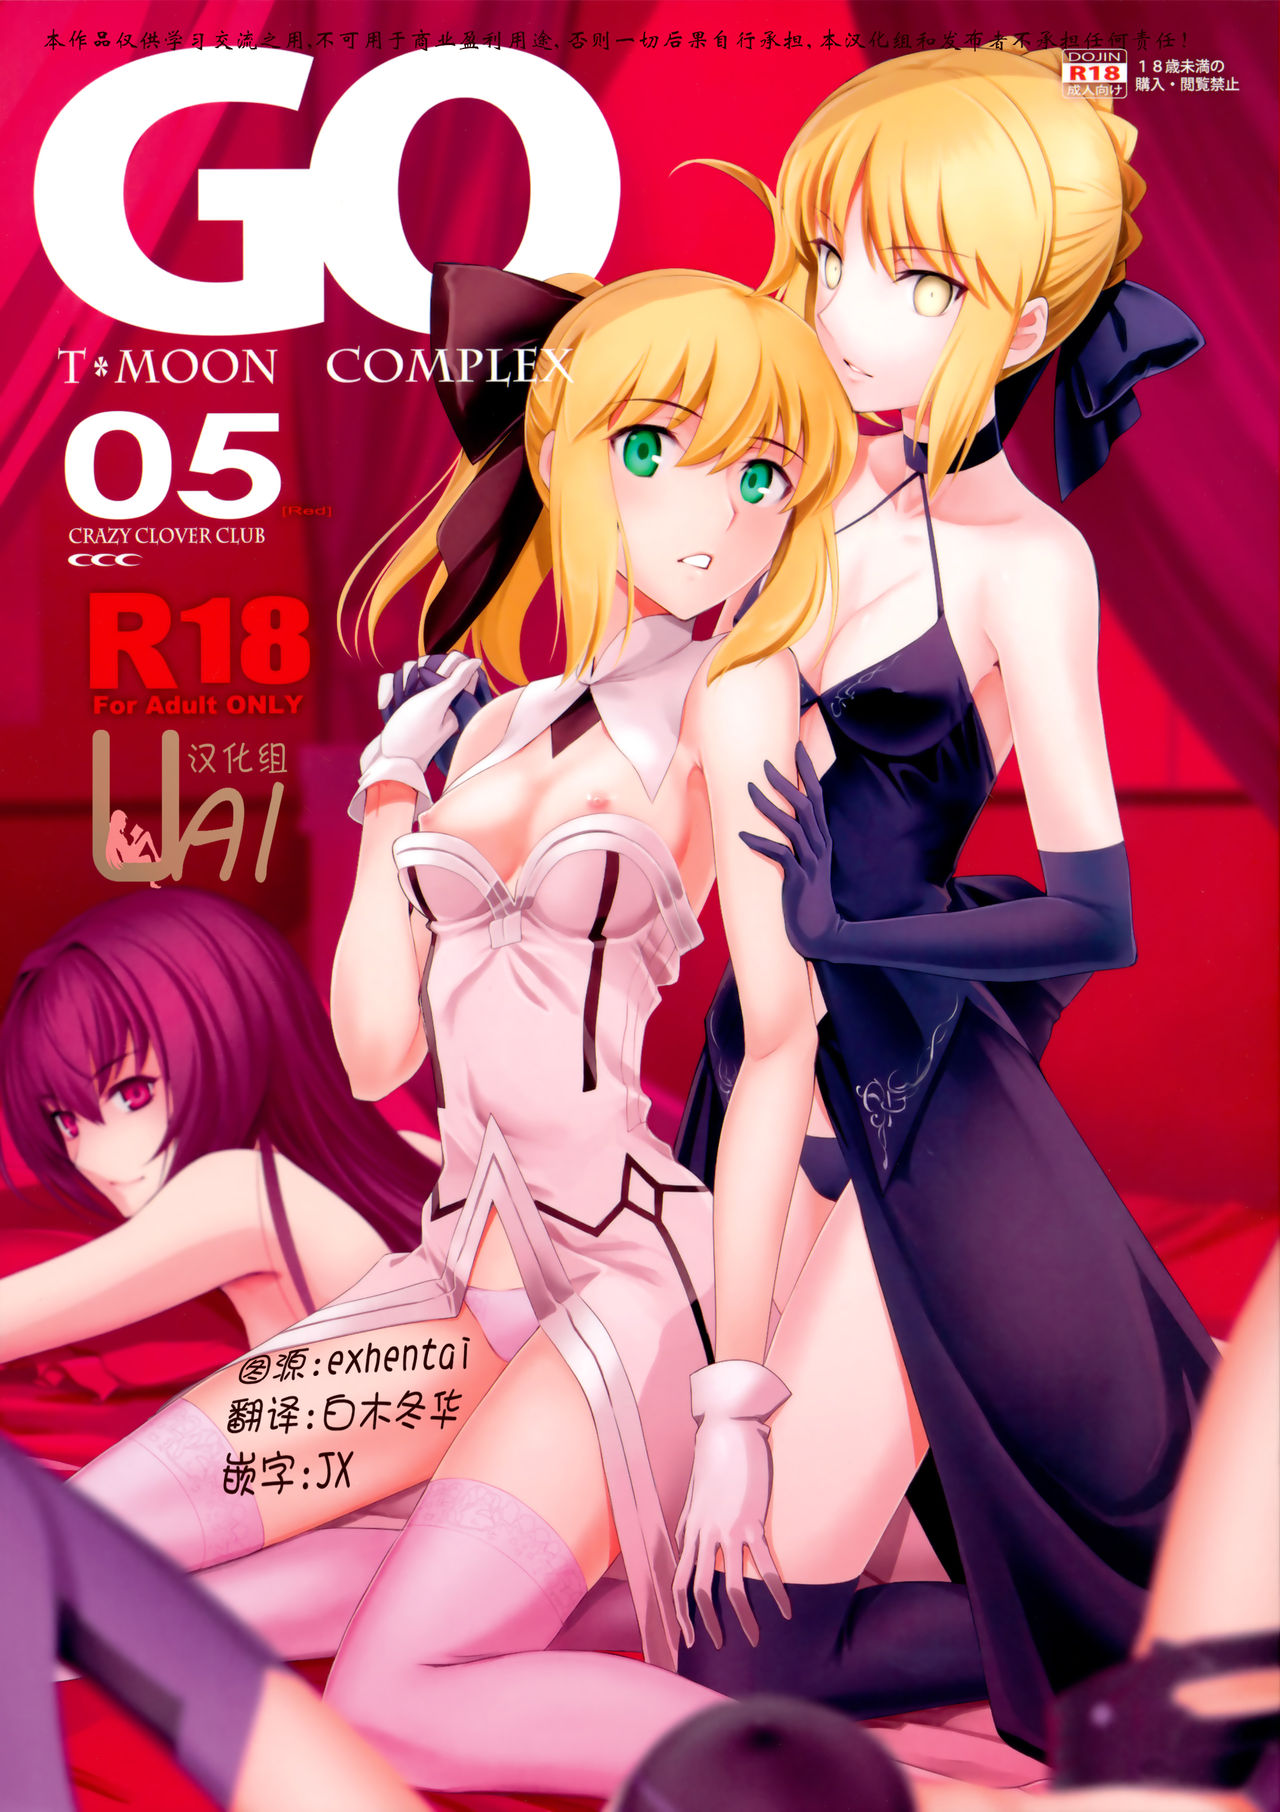 [CRAZY CLOVER CLUB (Kuroha Nue)] T*MOON COMPLEX GO 05 [Red] (Fate/Grand Order) [Chinese] [UAl汉化组] [CRAZY CLOVER CLUB (クロハぬえ)] T*MOON COMPLEX GO 05[Red] (Fate/Grand Order) [中国翻訳]